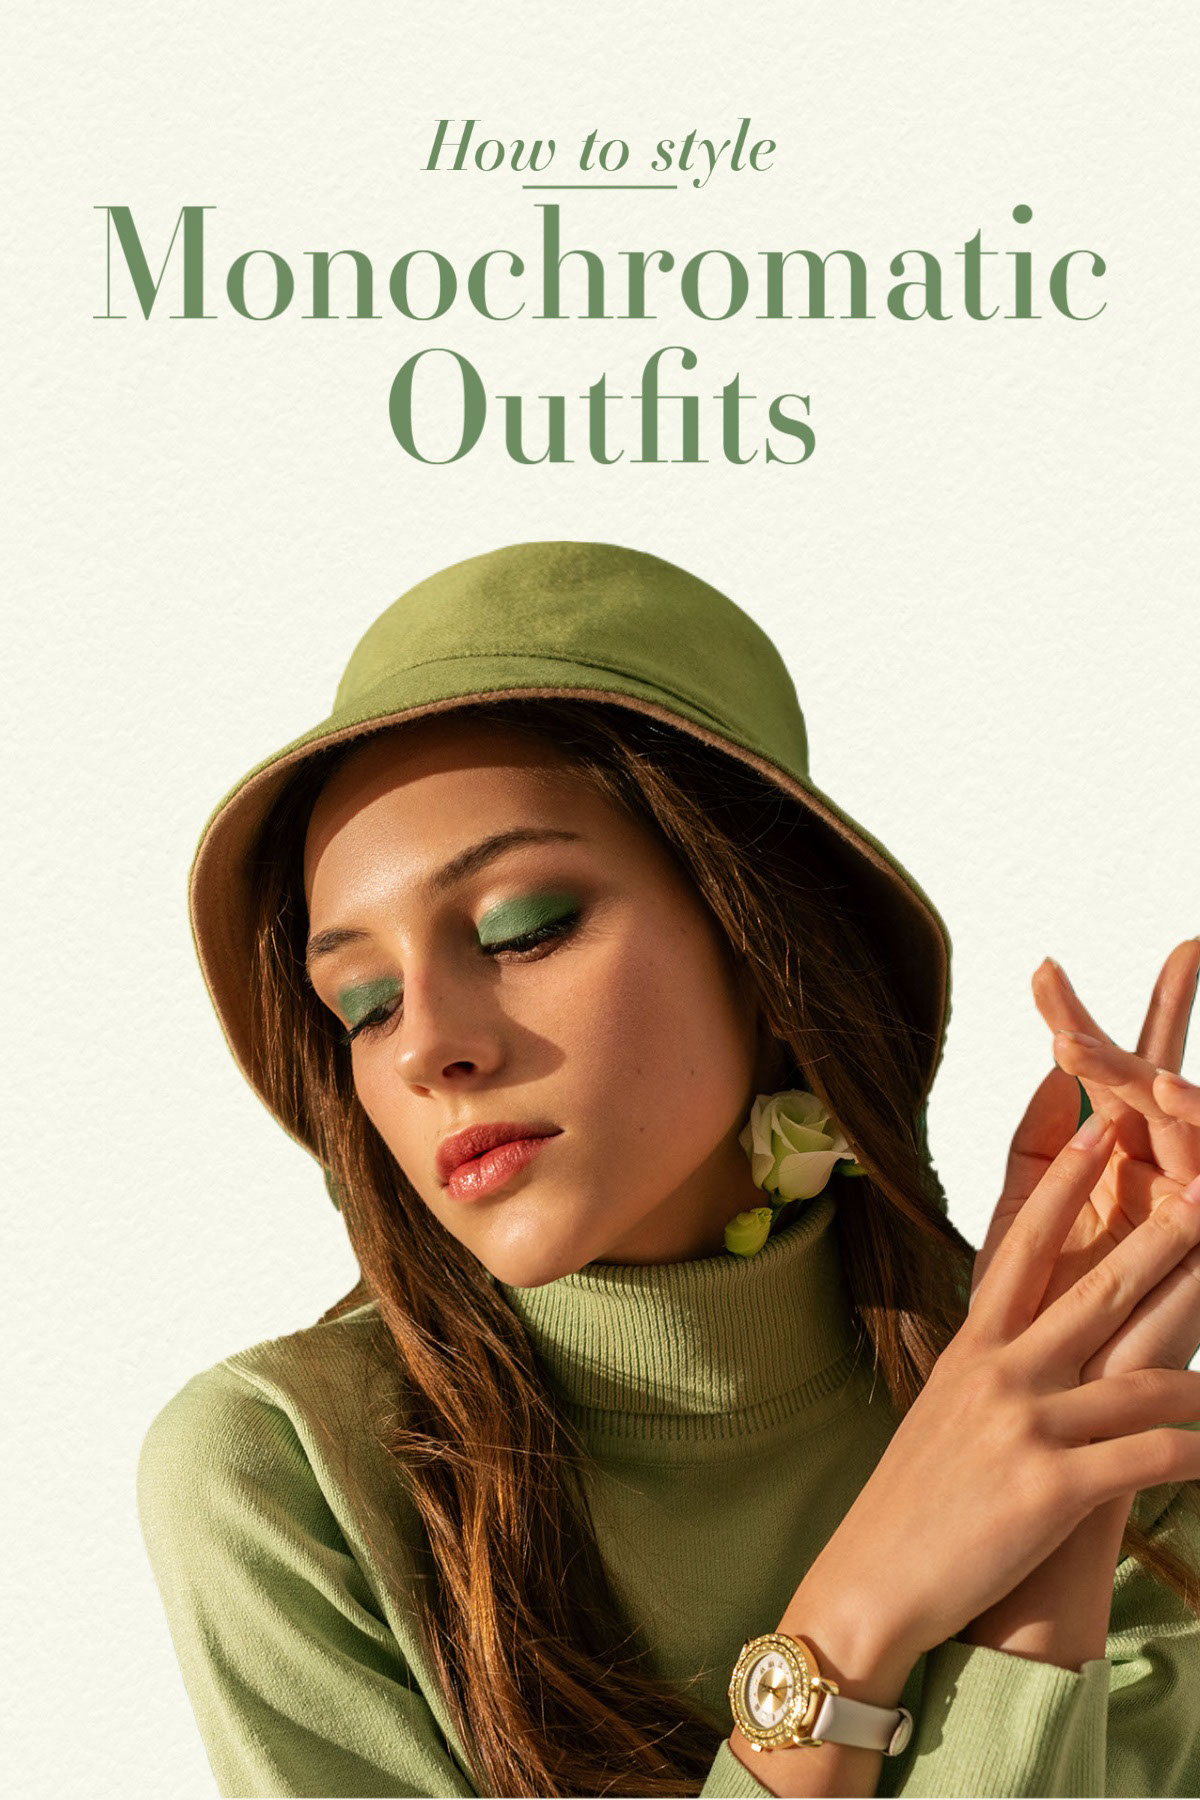 Green Monochromatic Outfit Pinterest Monochromatic Outfits How to style